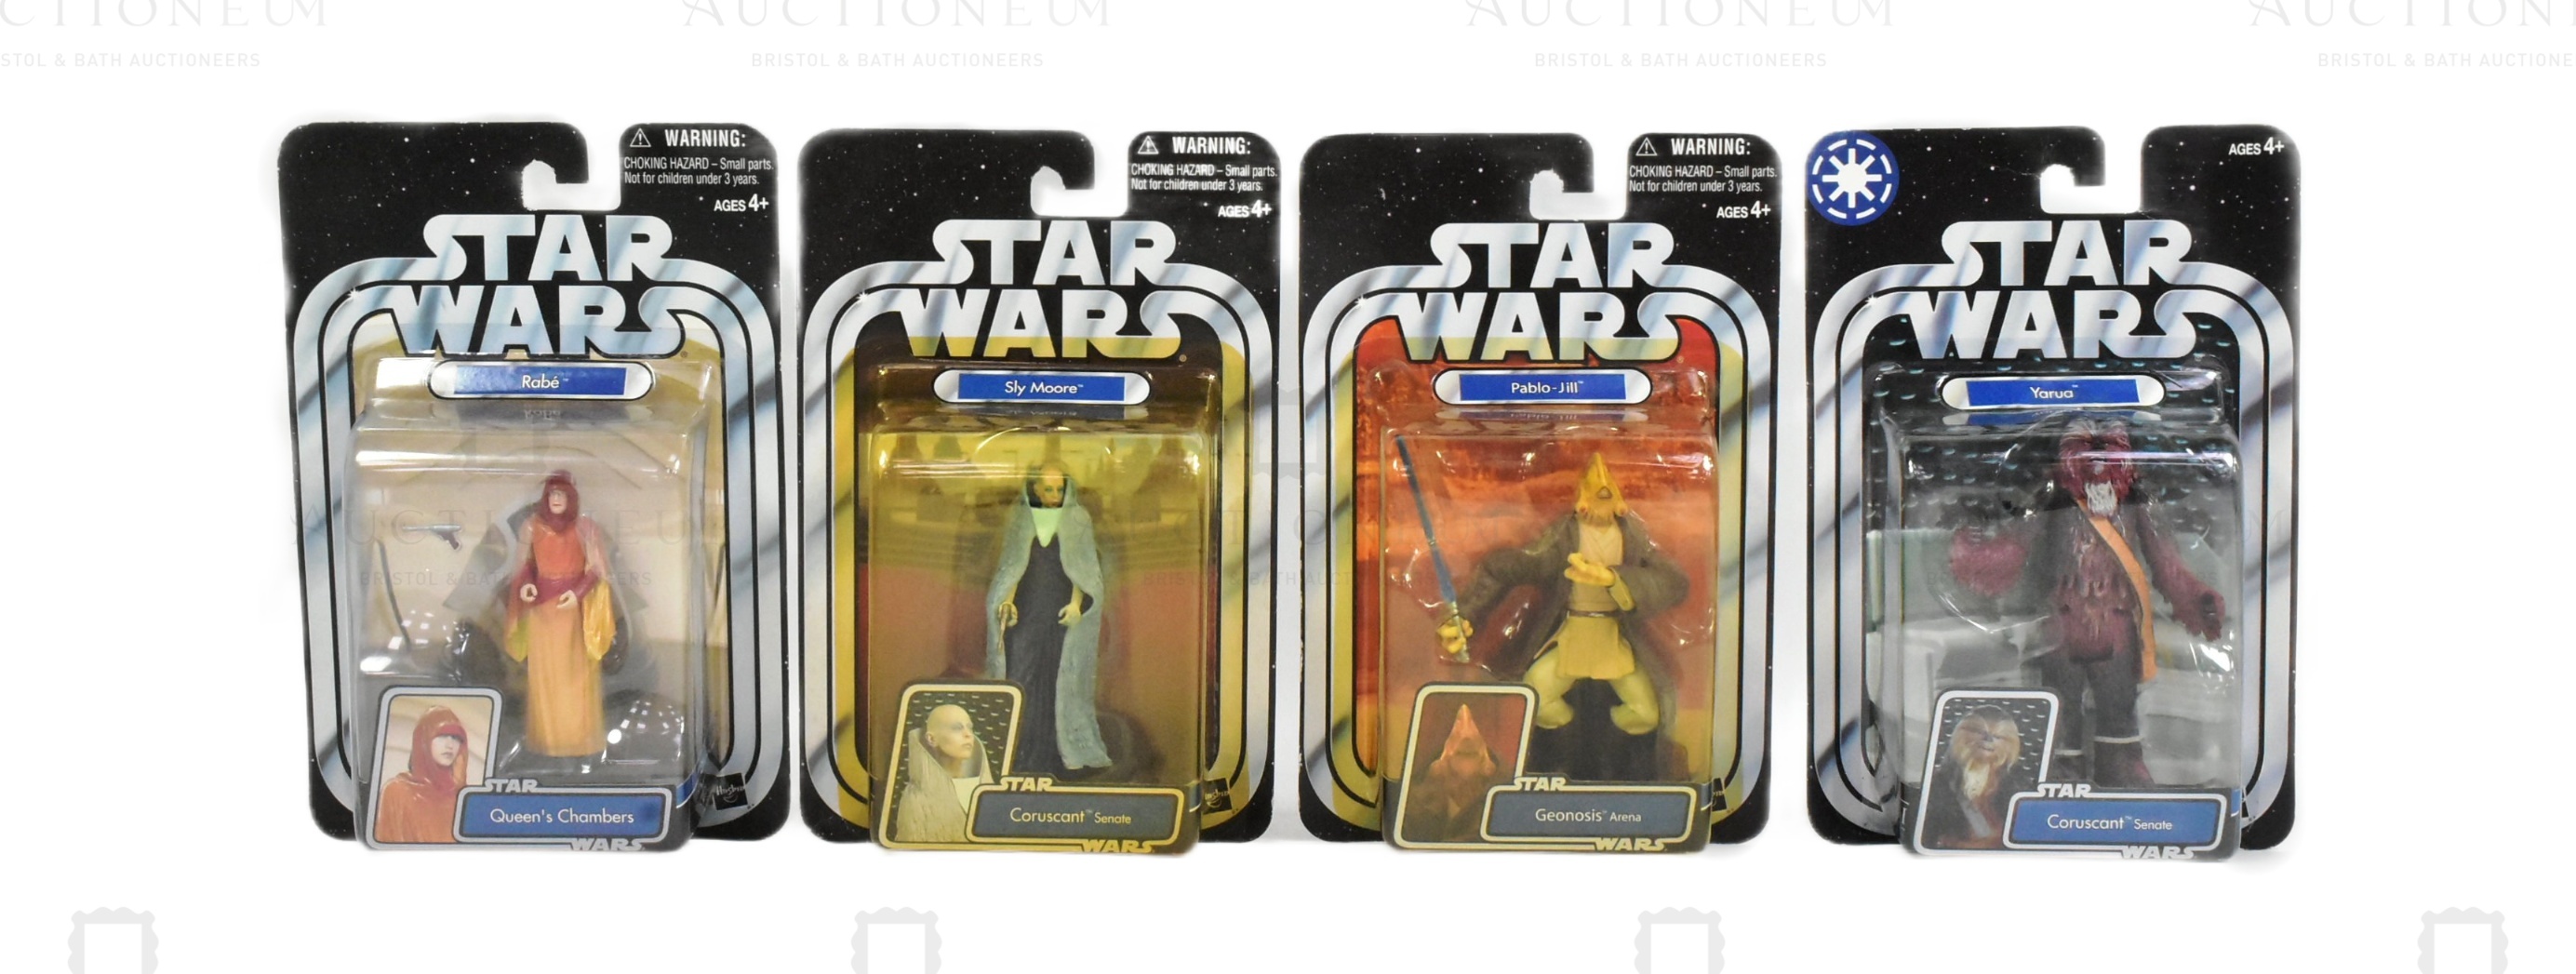 STAR WARS - 2004 COLLECTION OF CARDED ACTION FIGURES